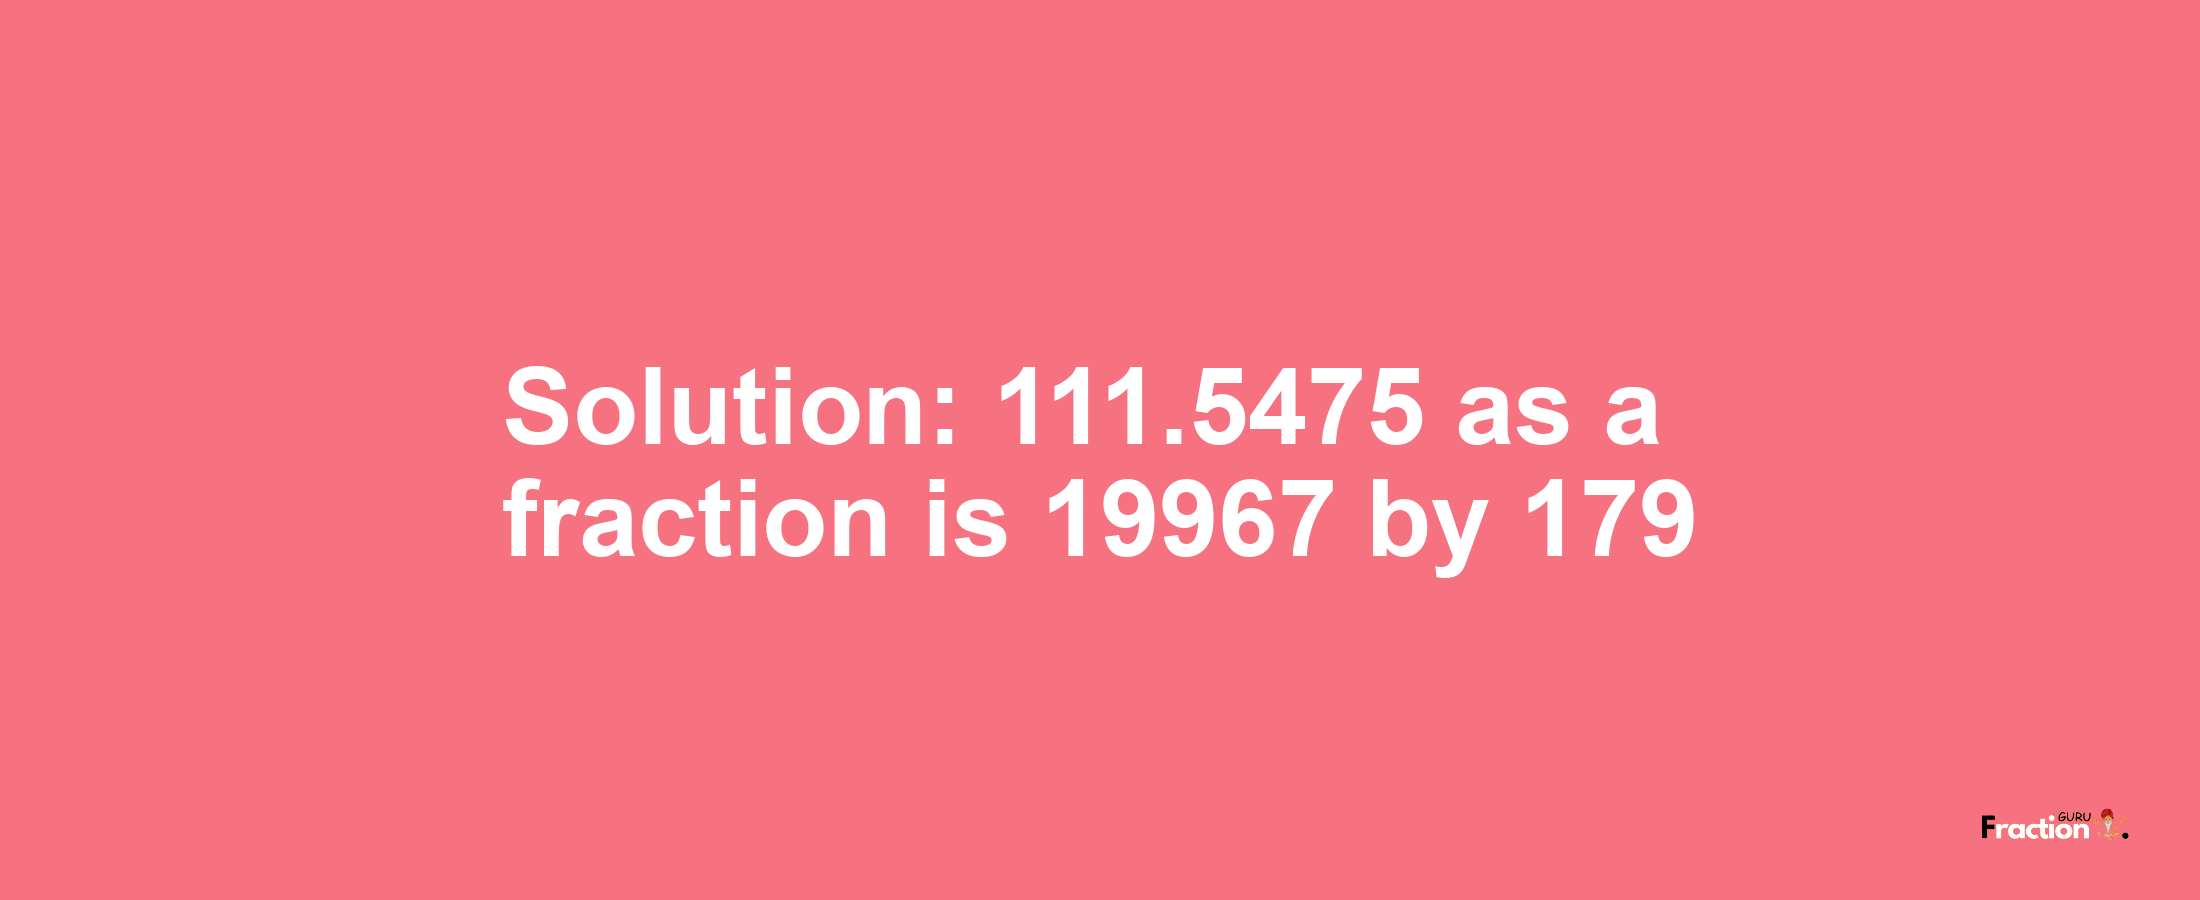 Solution:111.5475 as a fraction is 19967/179